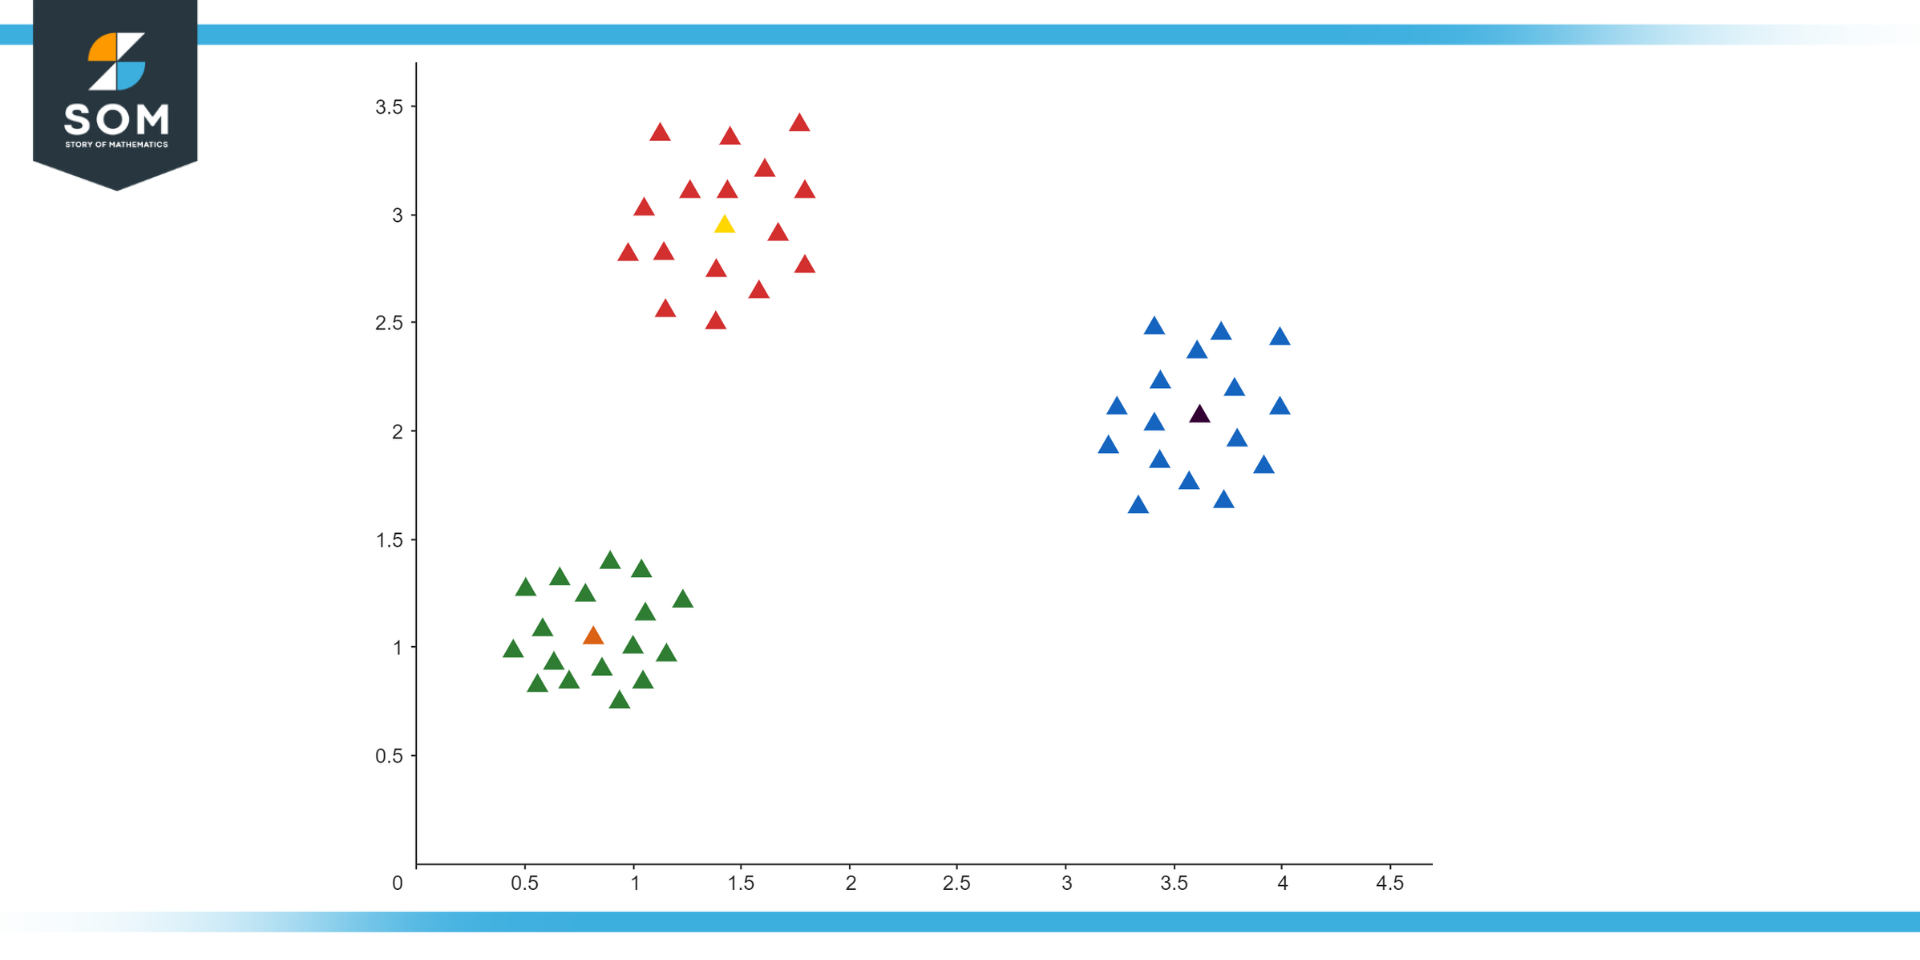 Centroid based clustering